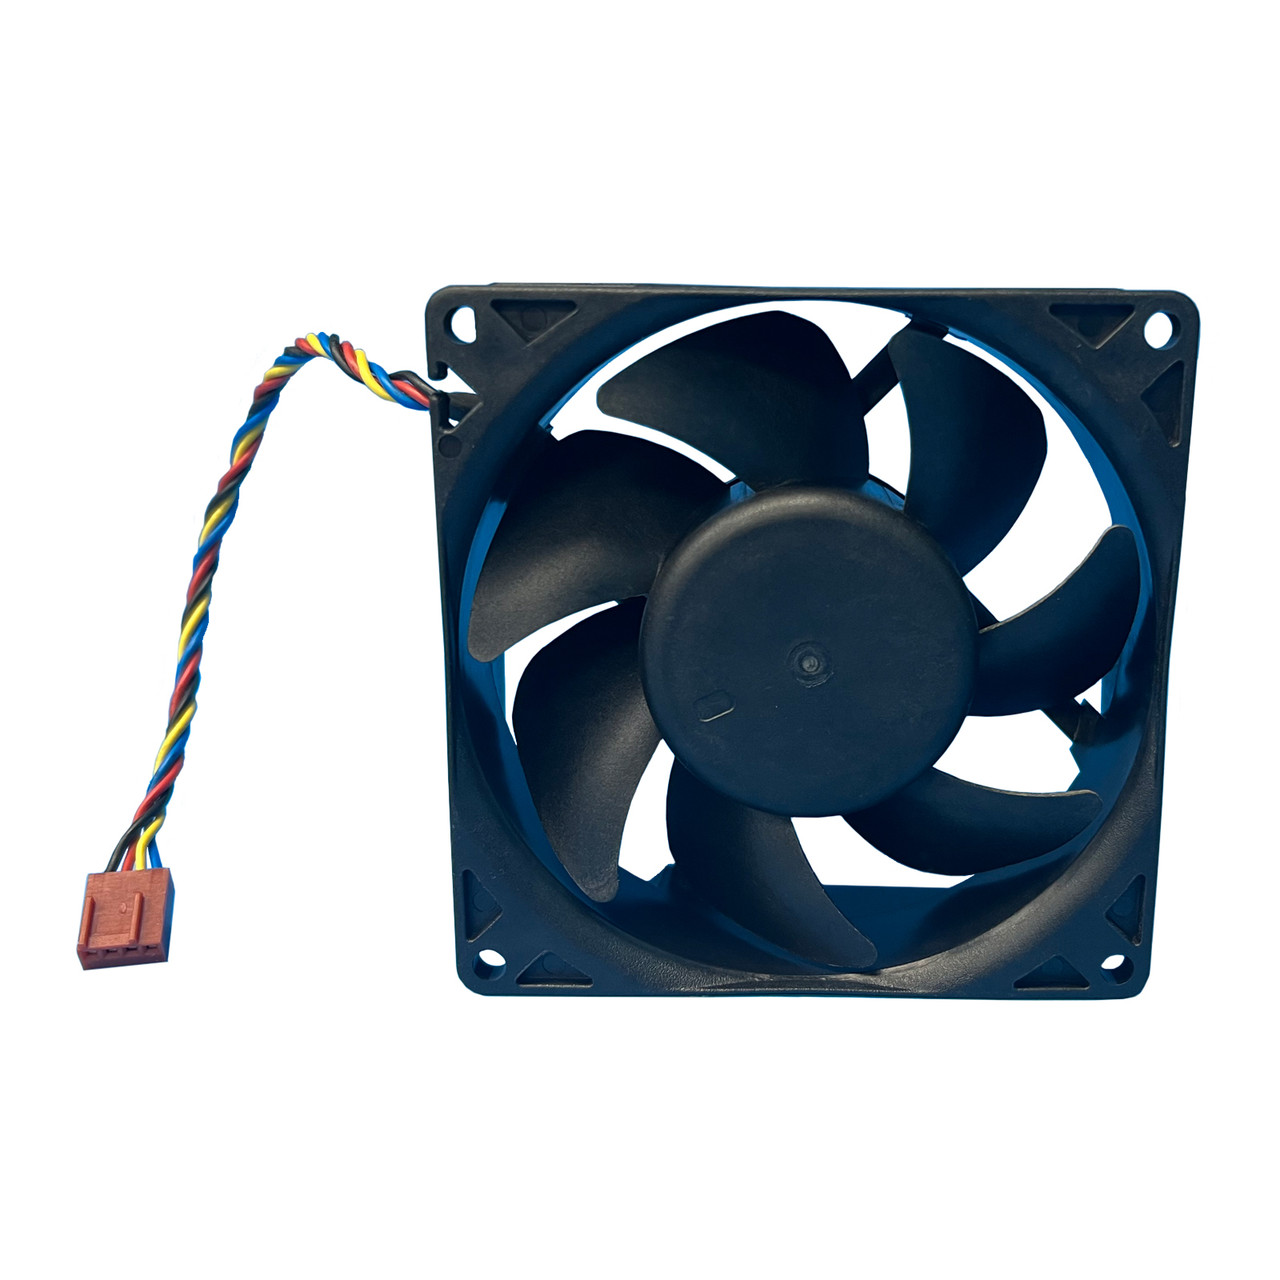 Dell KMCW0 Precision T3620 Cooling Fan MF92321V3-Q020-S99